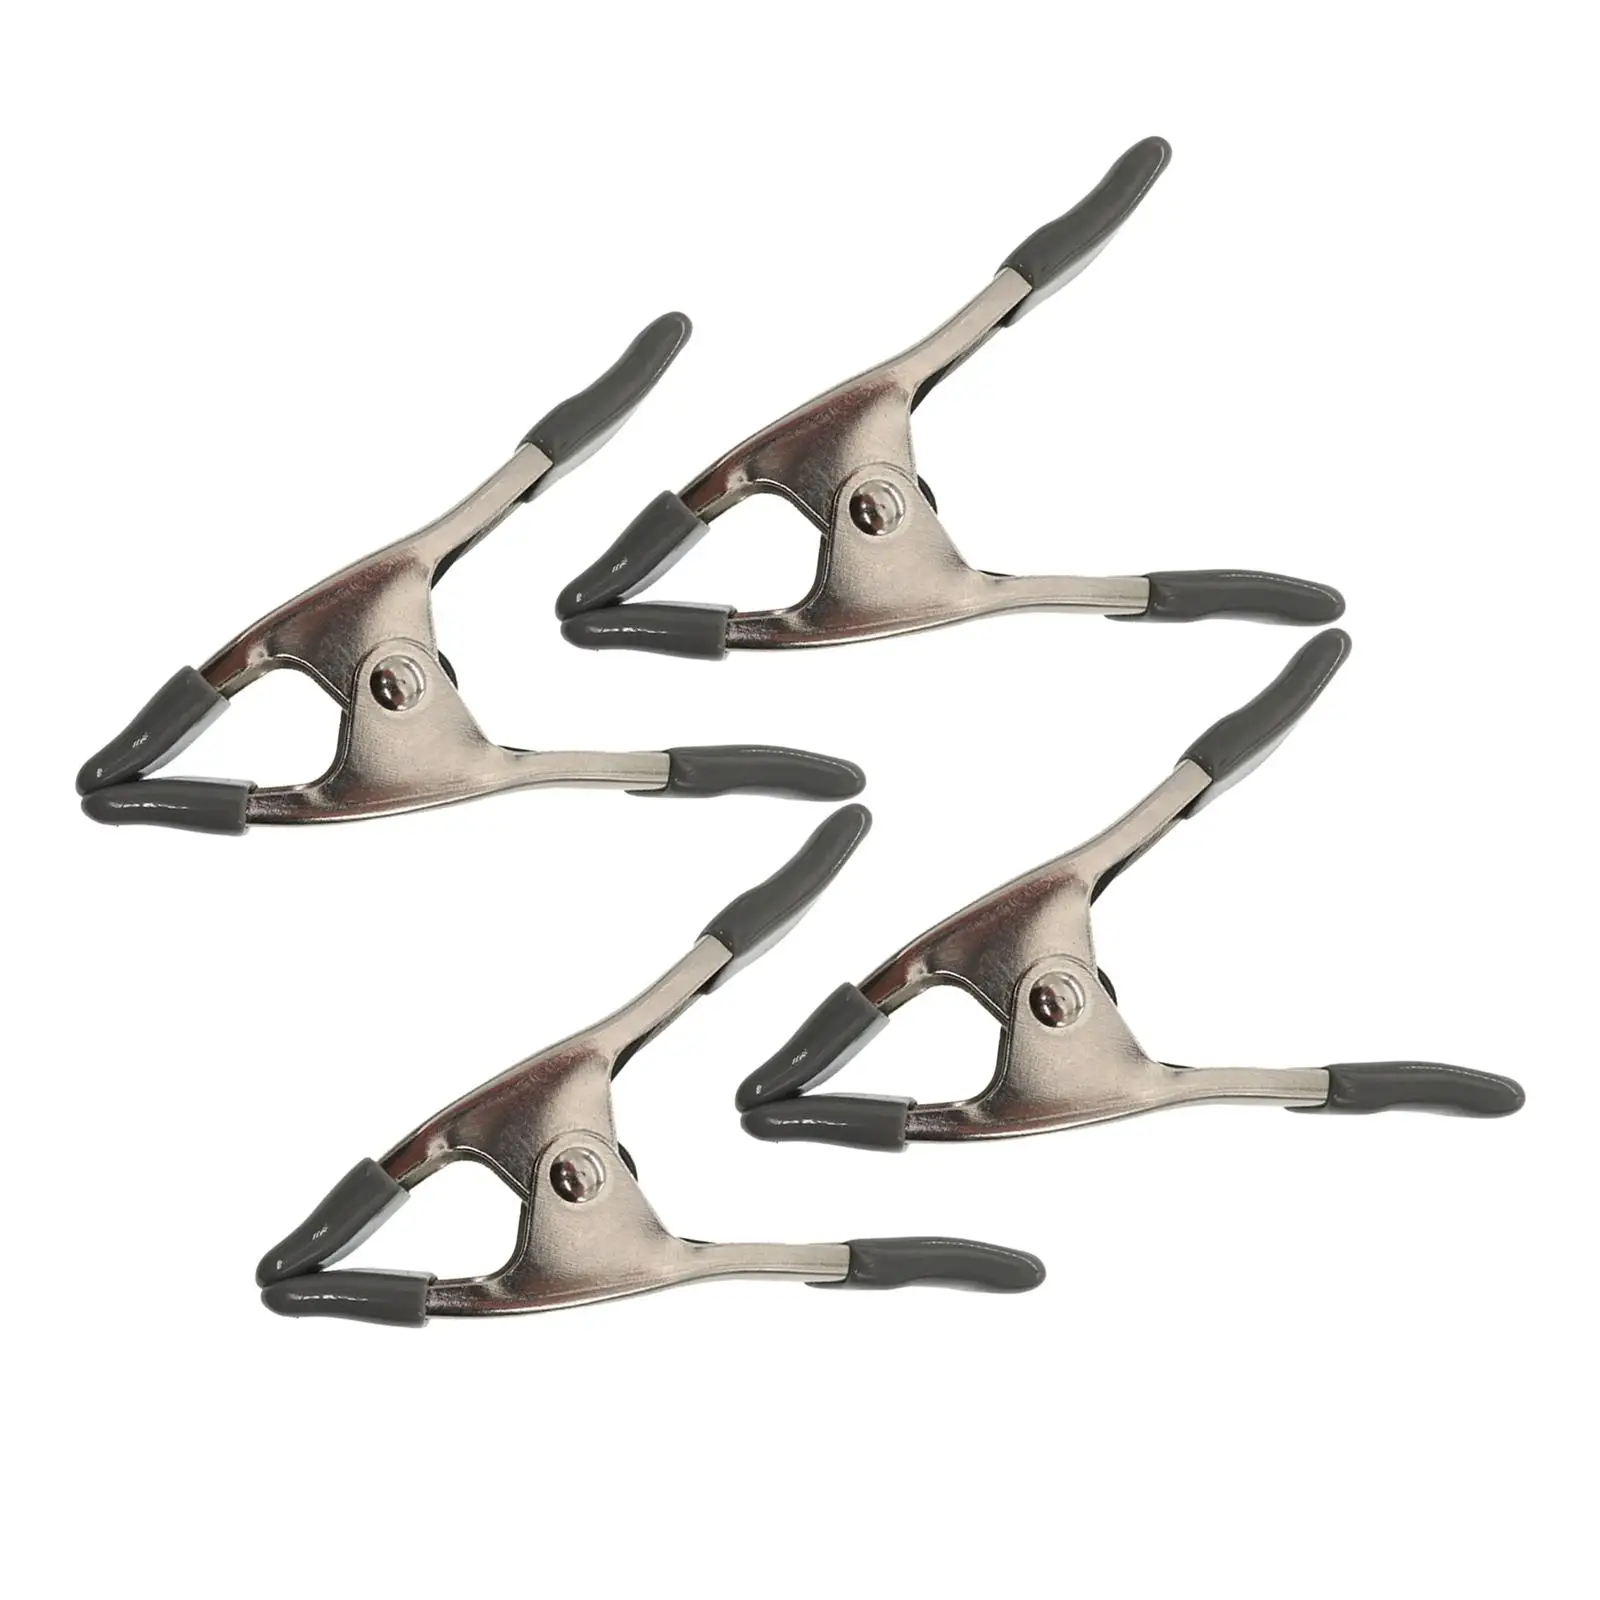 4 Pieces Spring Clamps Devices Durable Backdrop Clips for Woodworking DIY